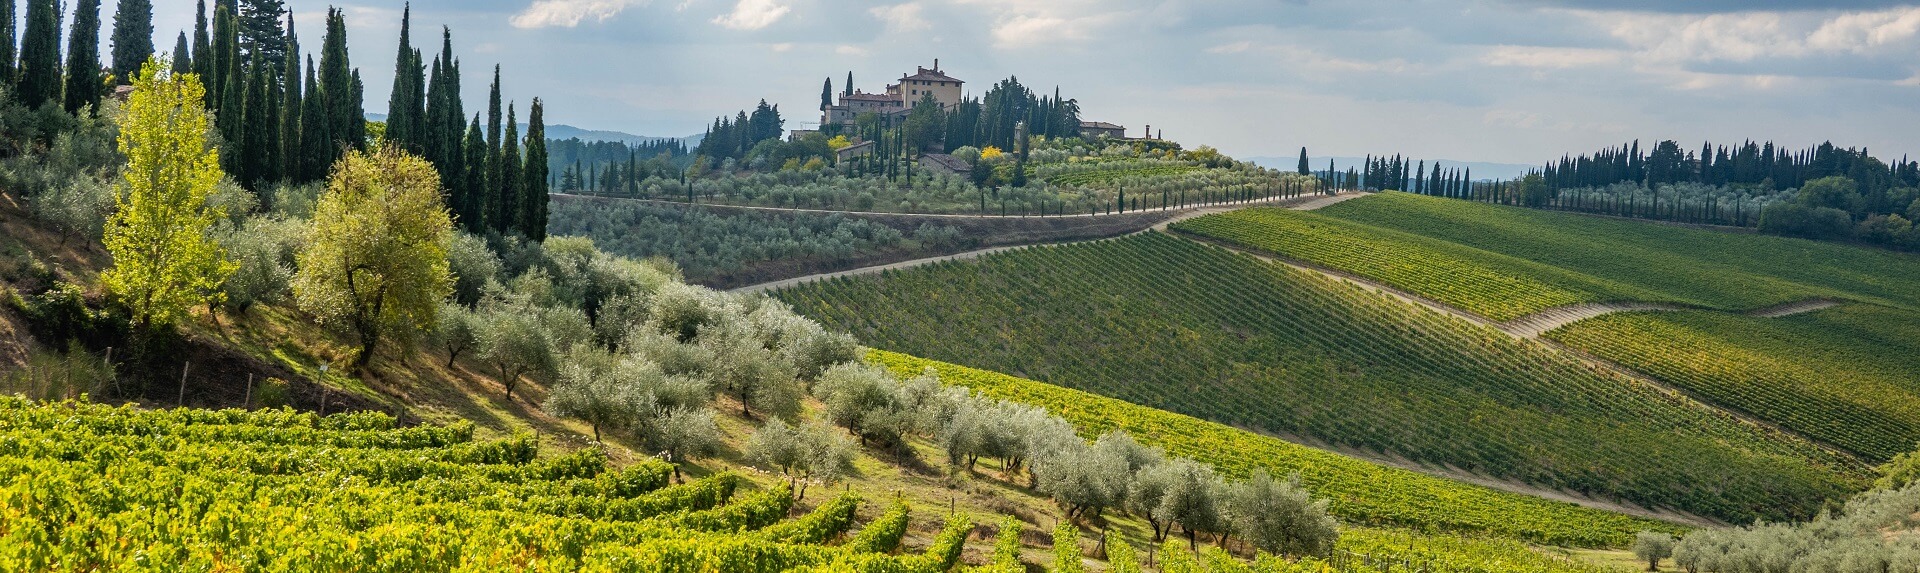 How far is Tuscany wine country from Florence?